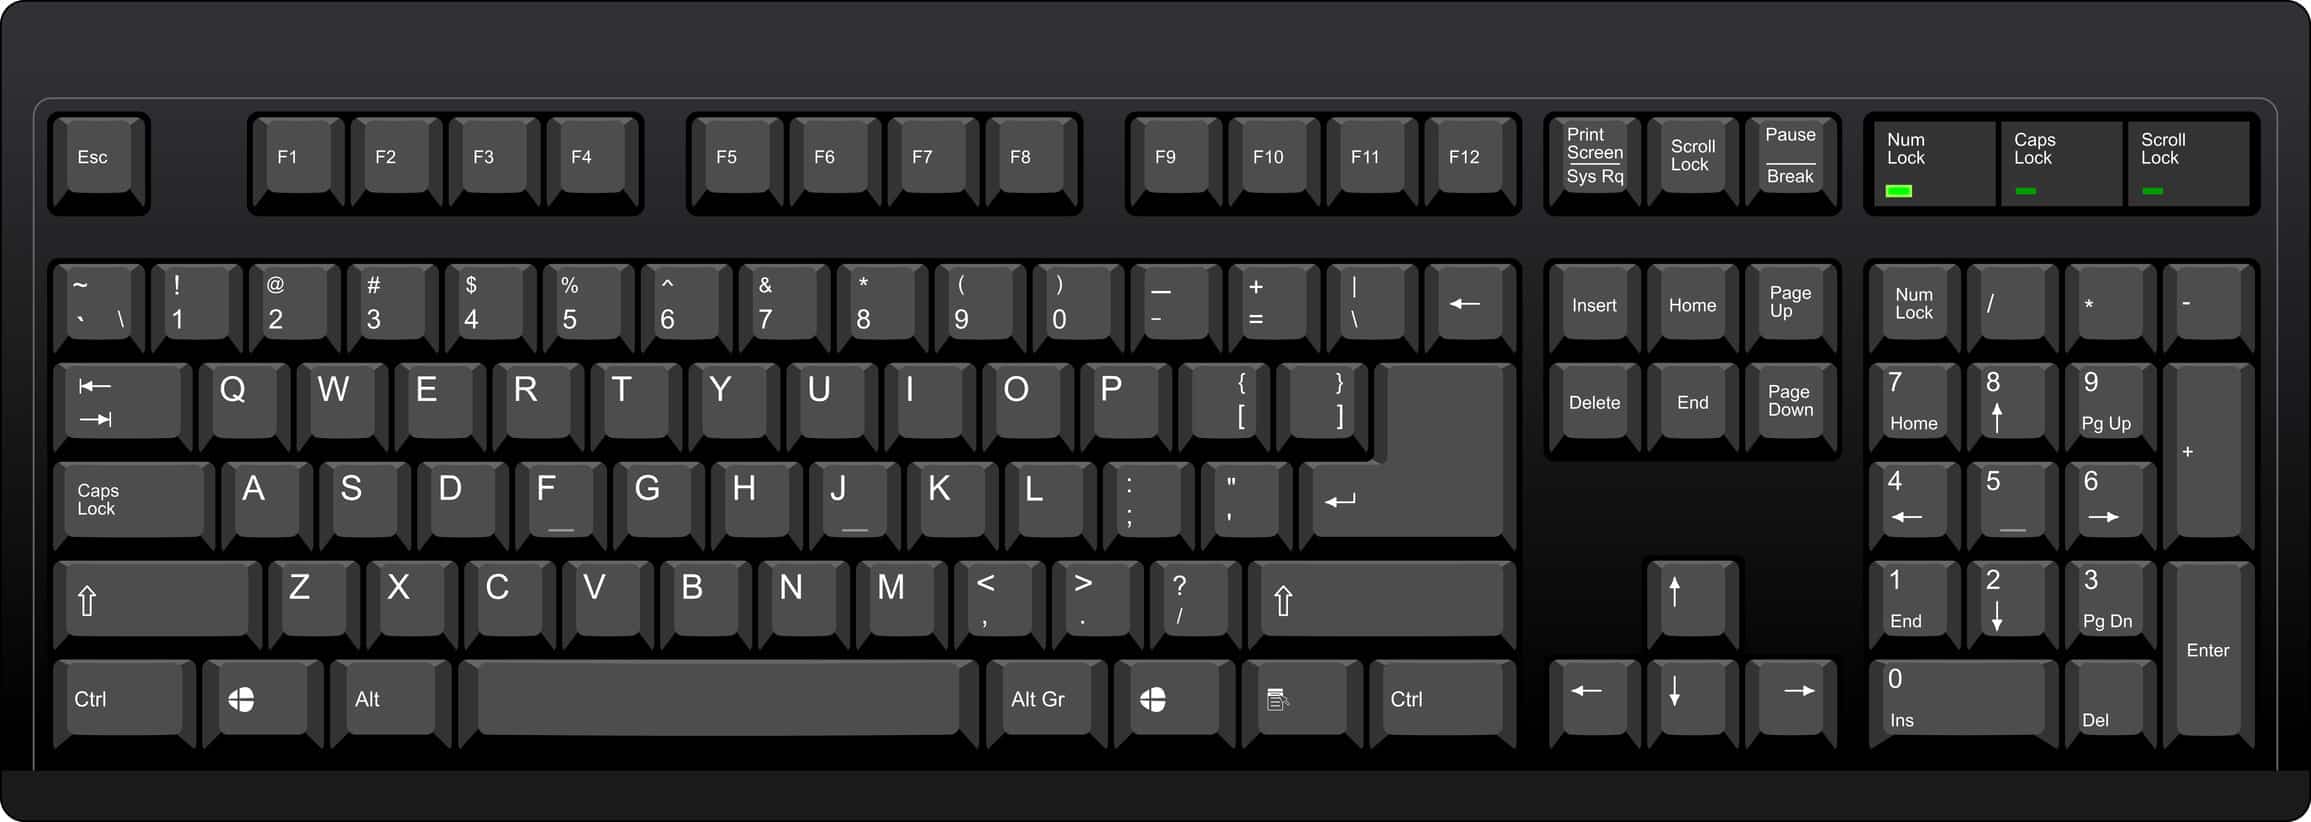 black-qwerty-keyboard-with-us-english-layout-lucidica-it-support-london